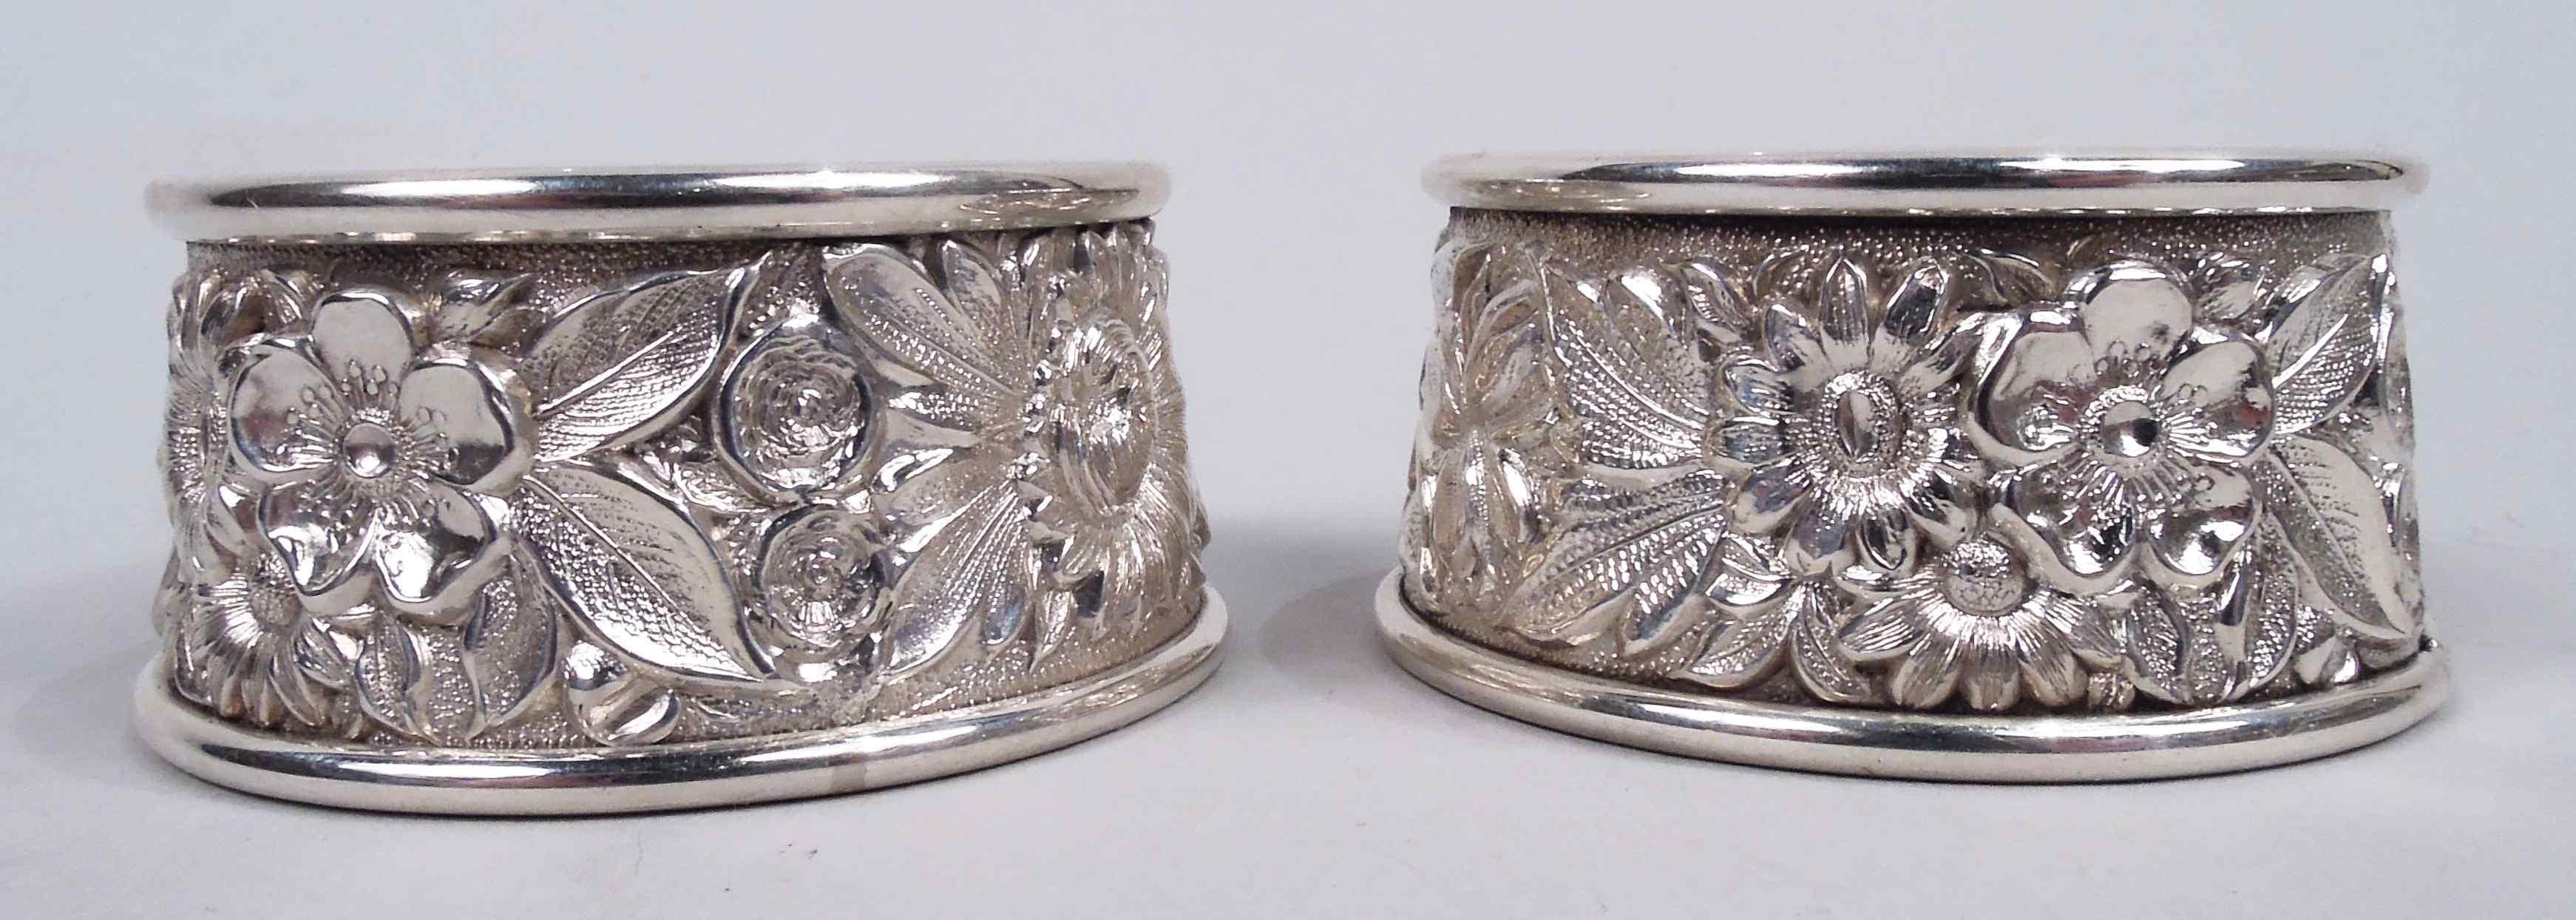 Edwardian Pair of Kirk Baltimore Repousse Sterling Silver Open Salts